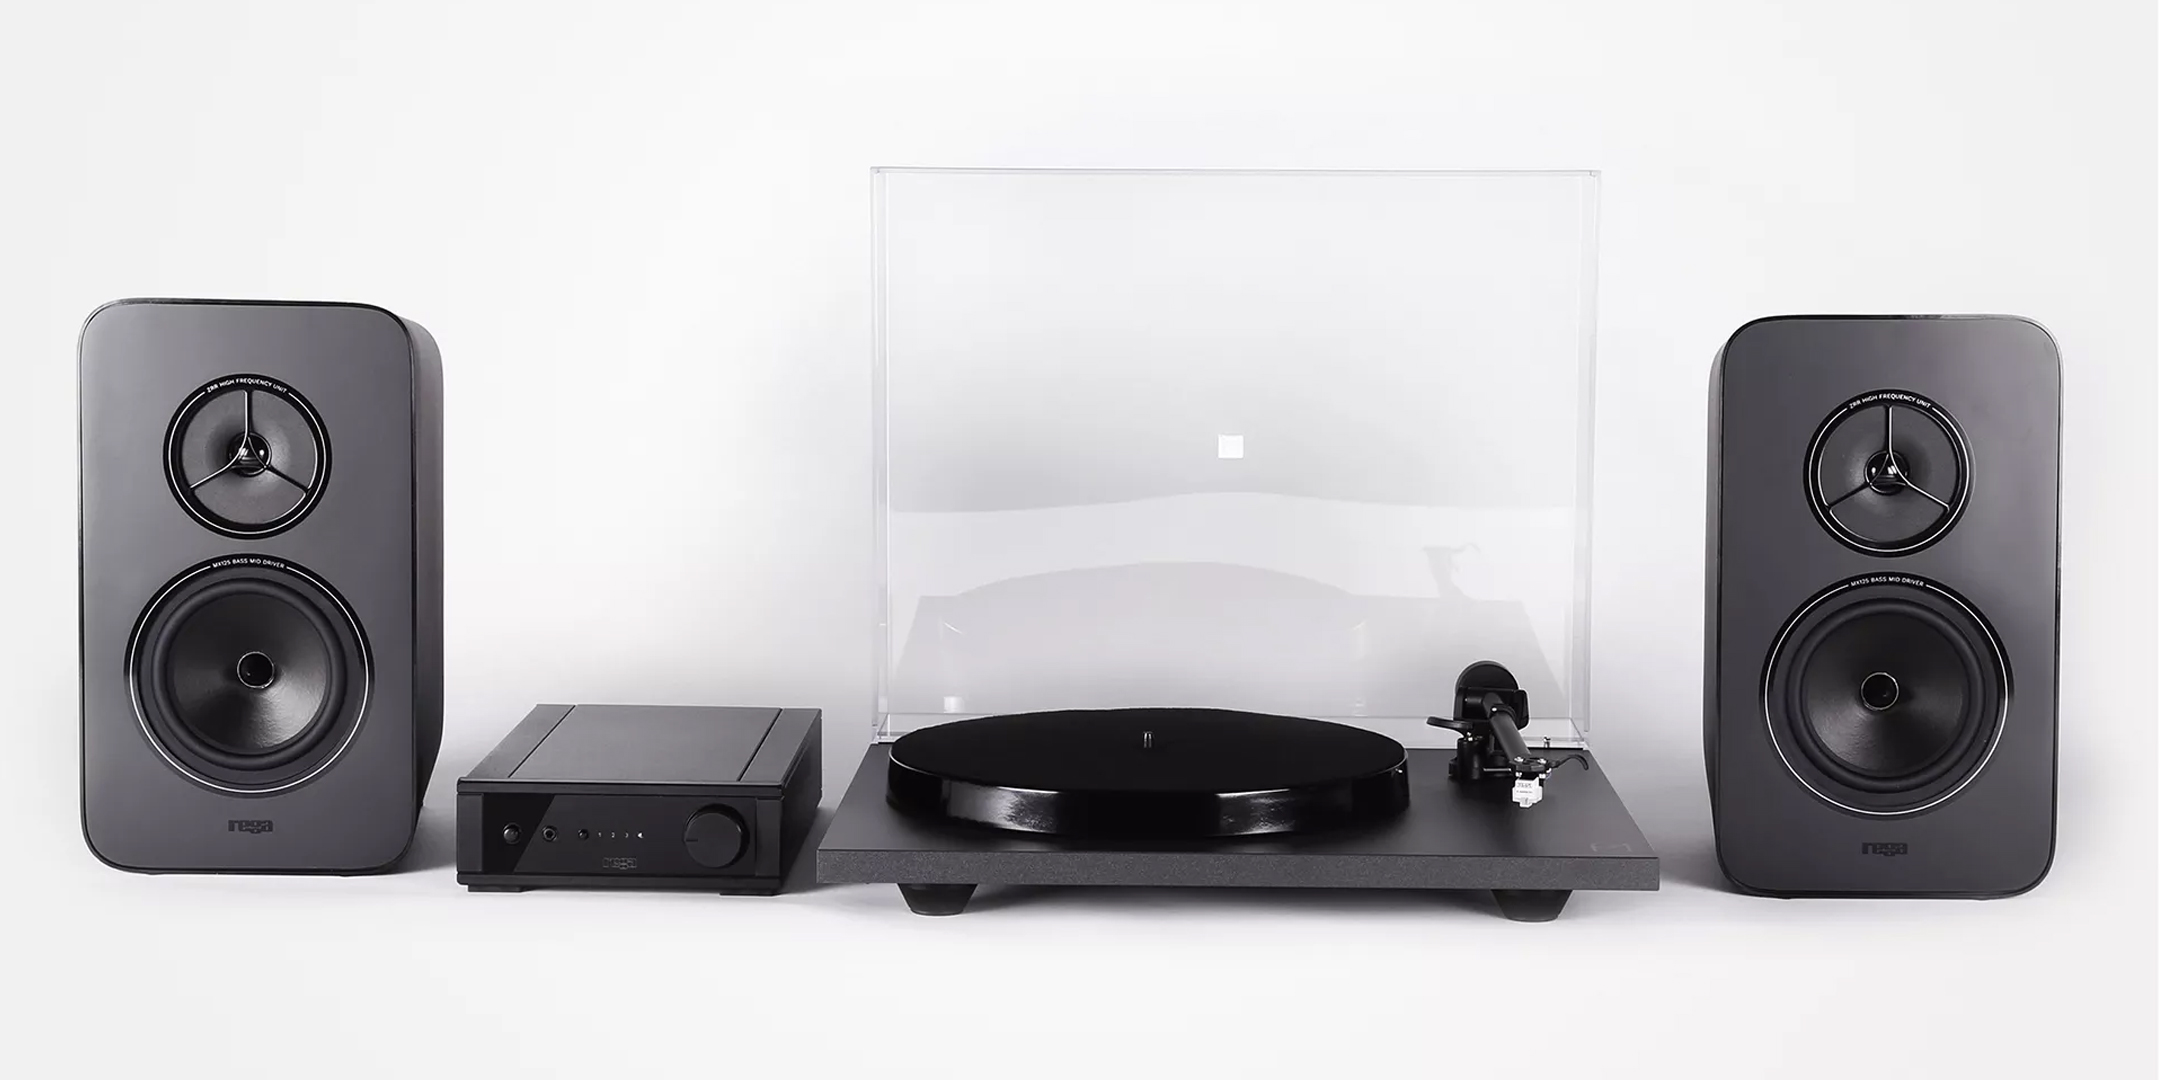 Pic of Rega System One audio system against a white background